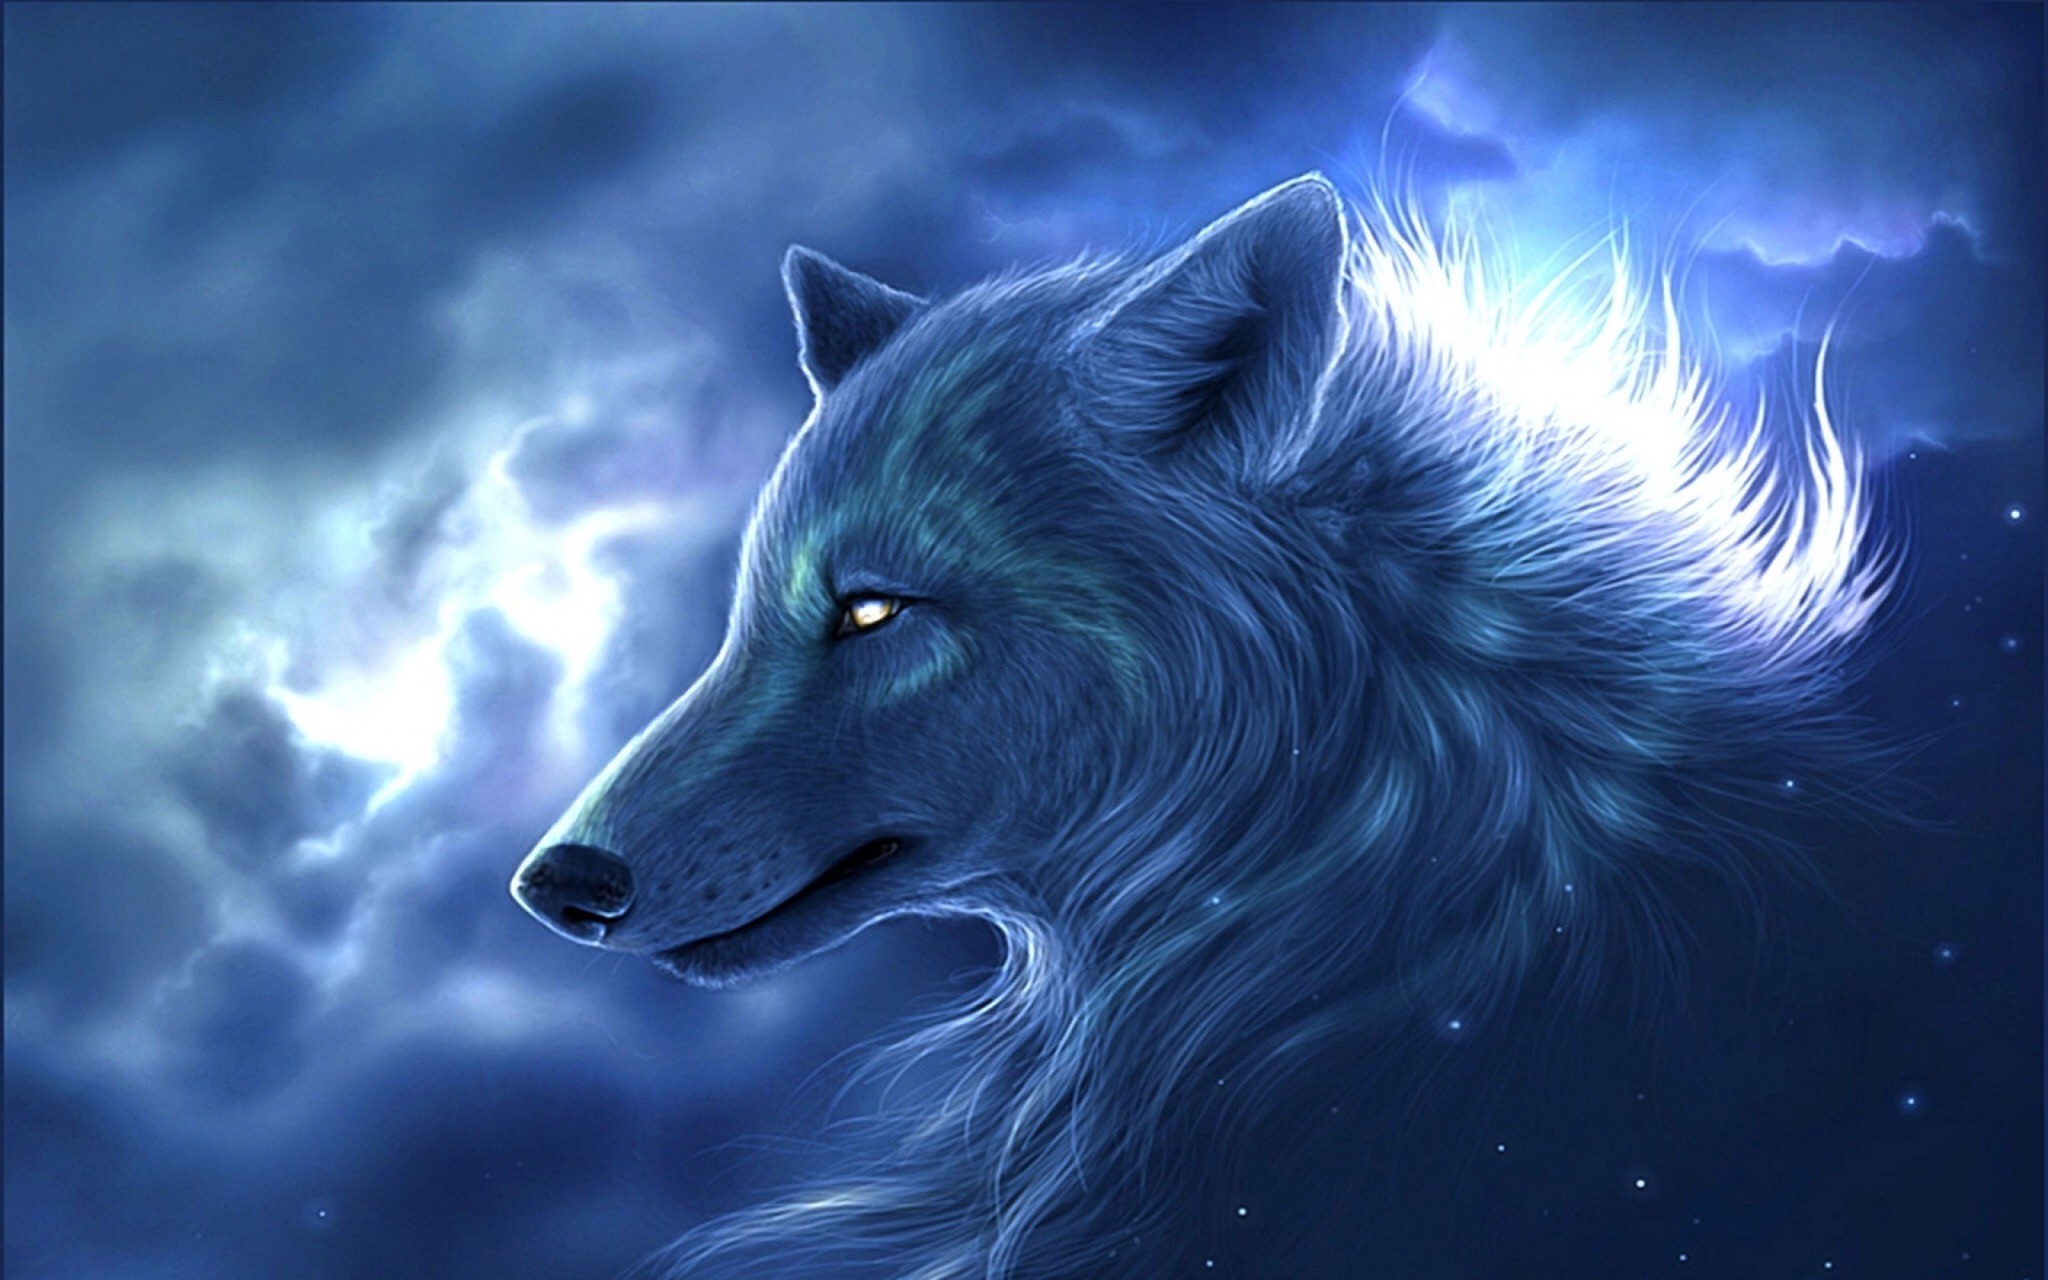 2048x1280 Wolf Wallpaper Love Wallpapers For Desktop Pictures Tattoo Design